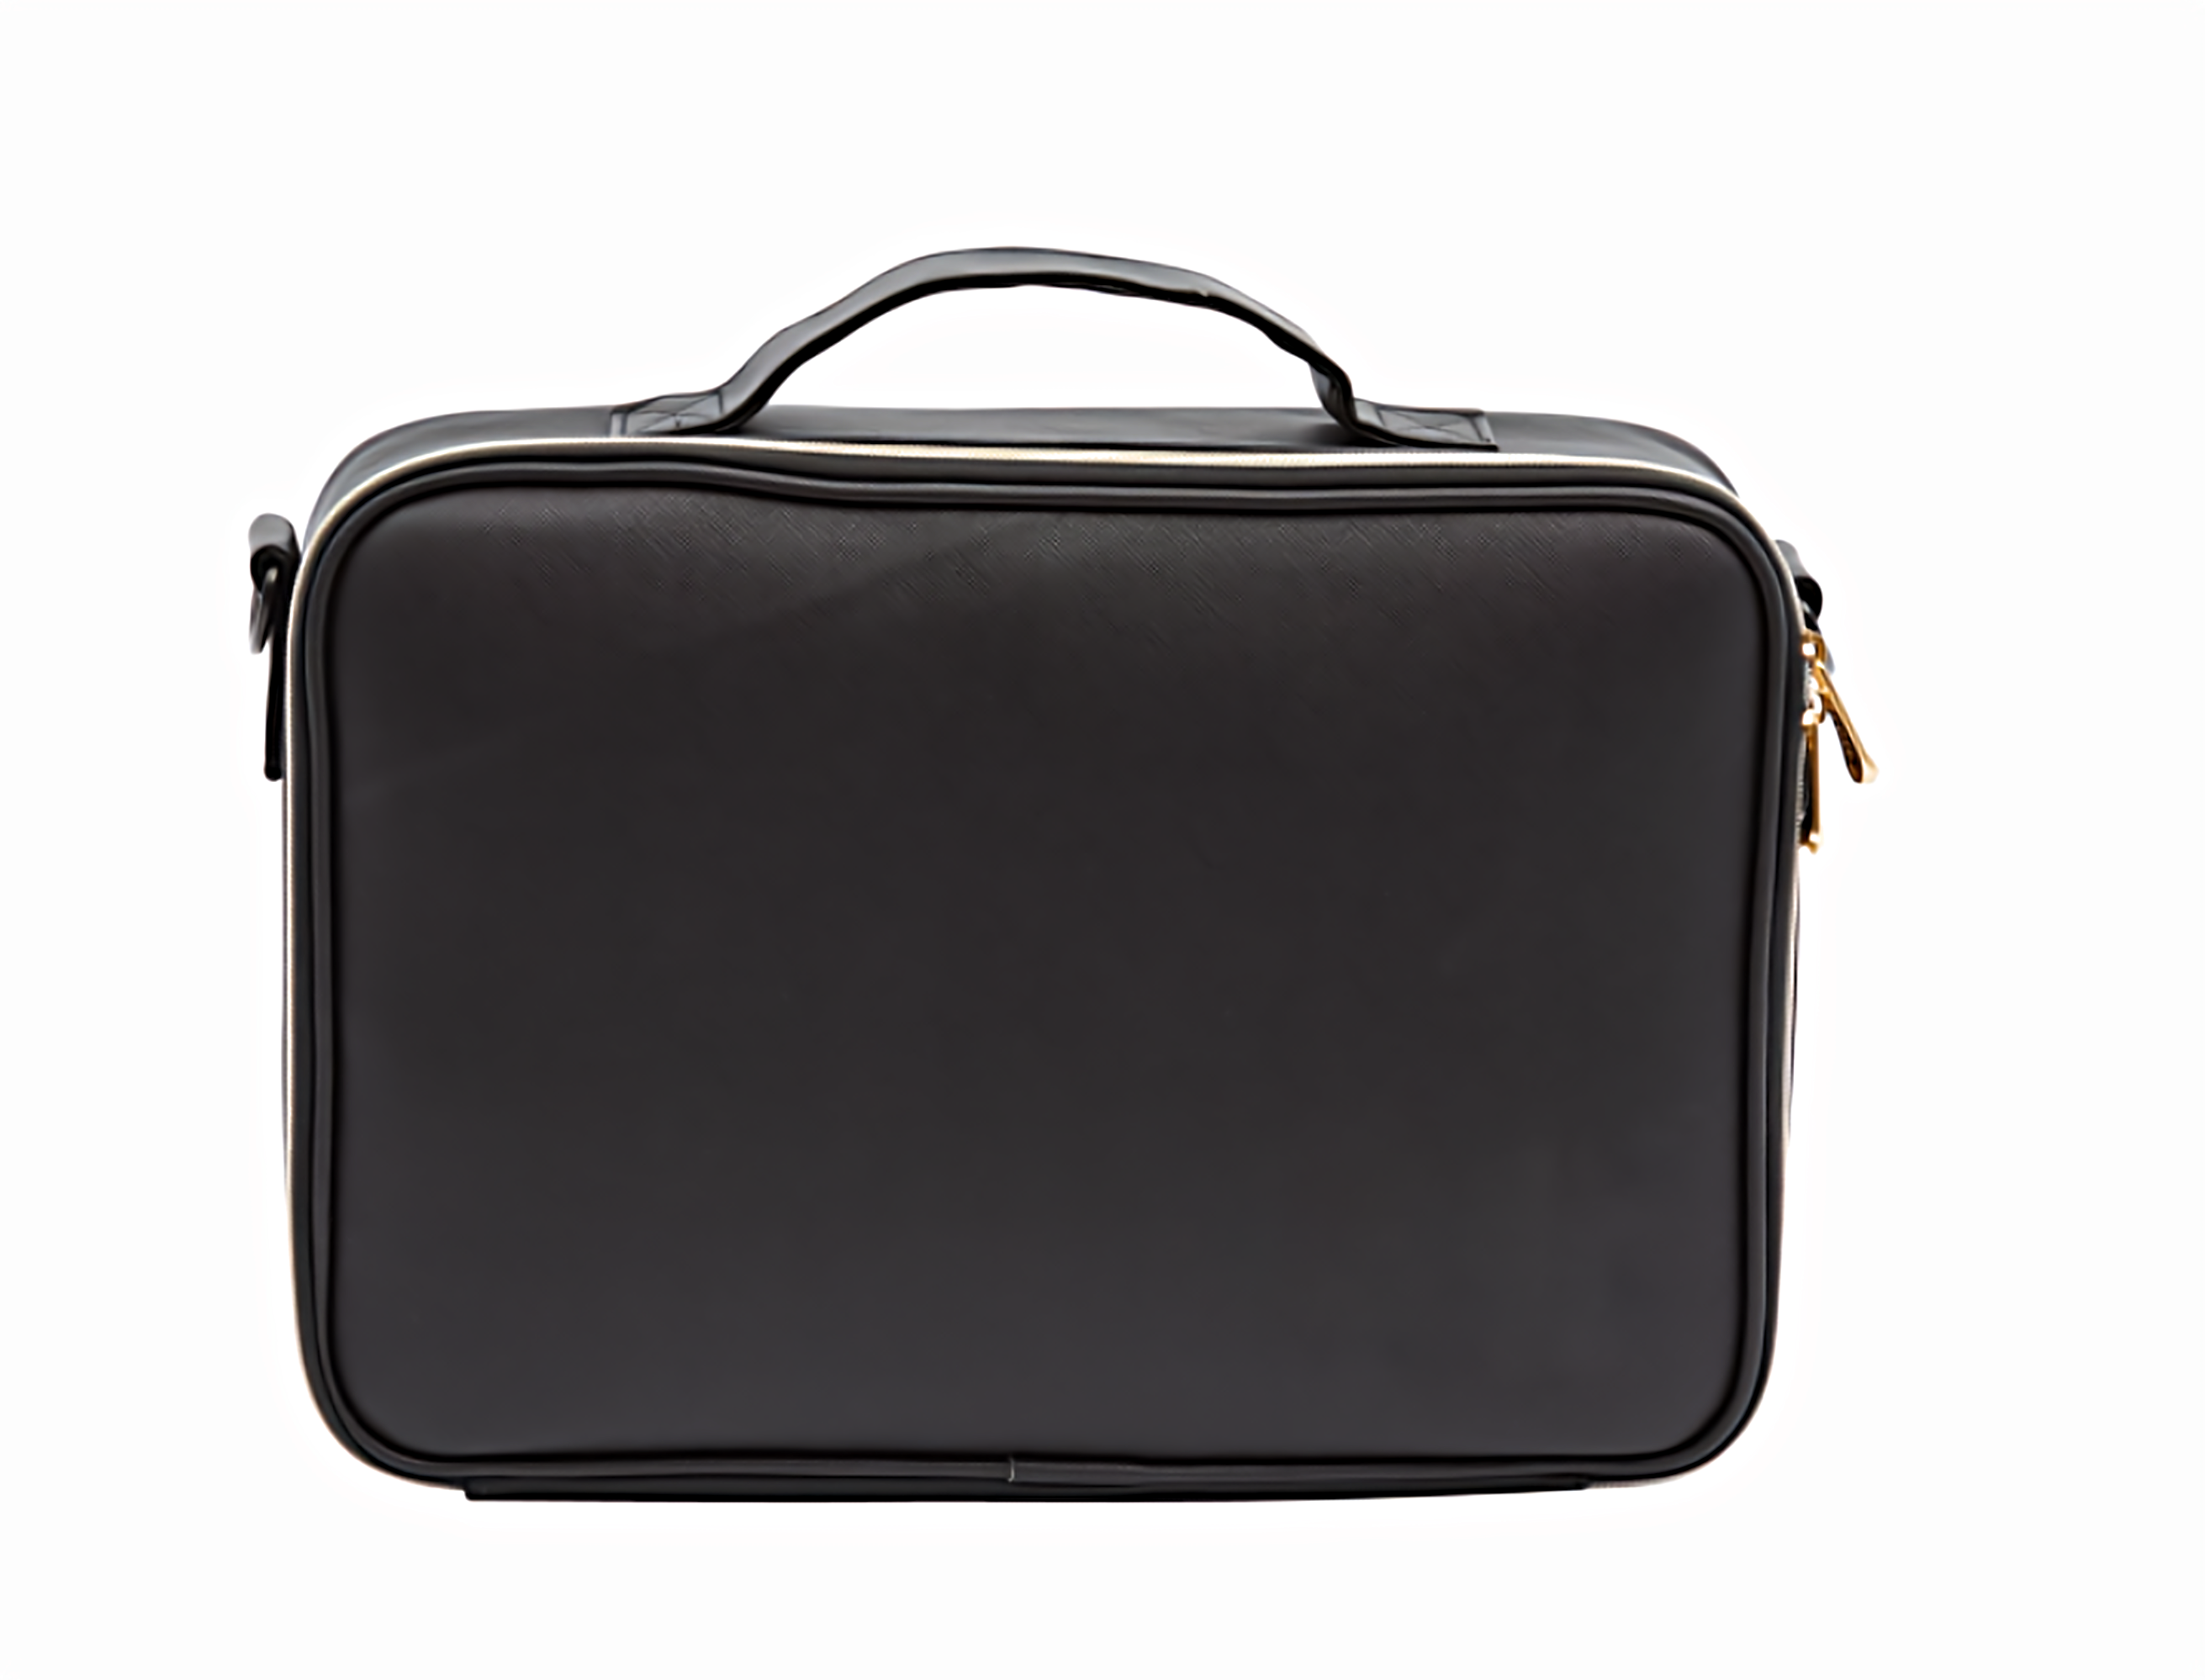 Professional Travel Makeup Case™ 50% OFF - BLISS & ME Beauty